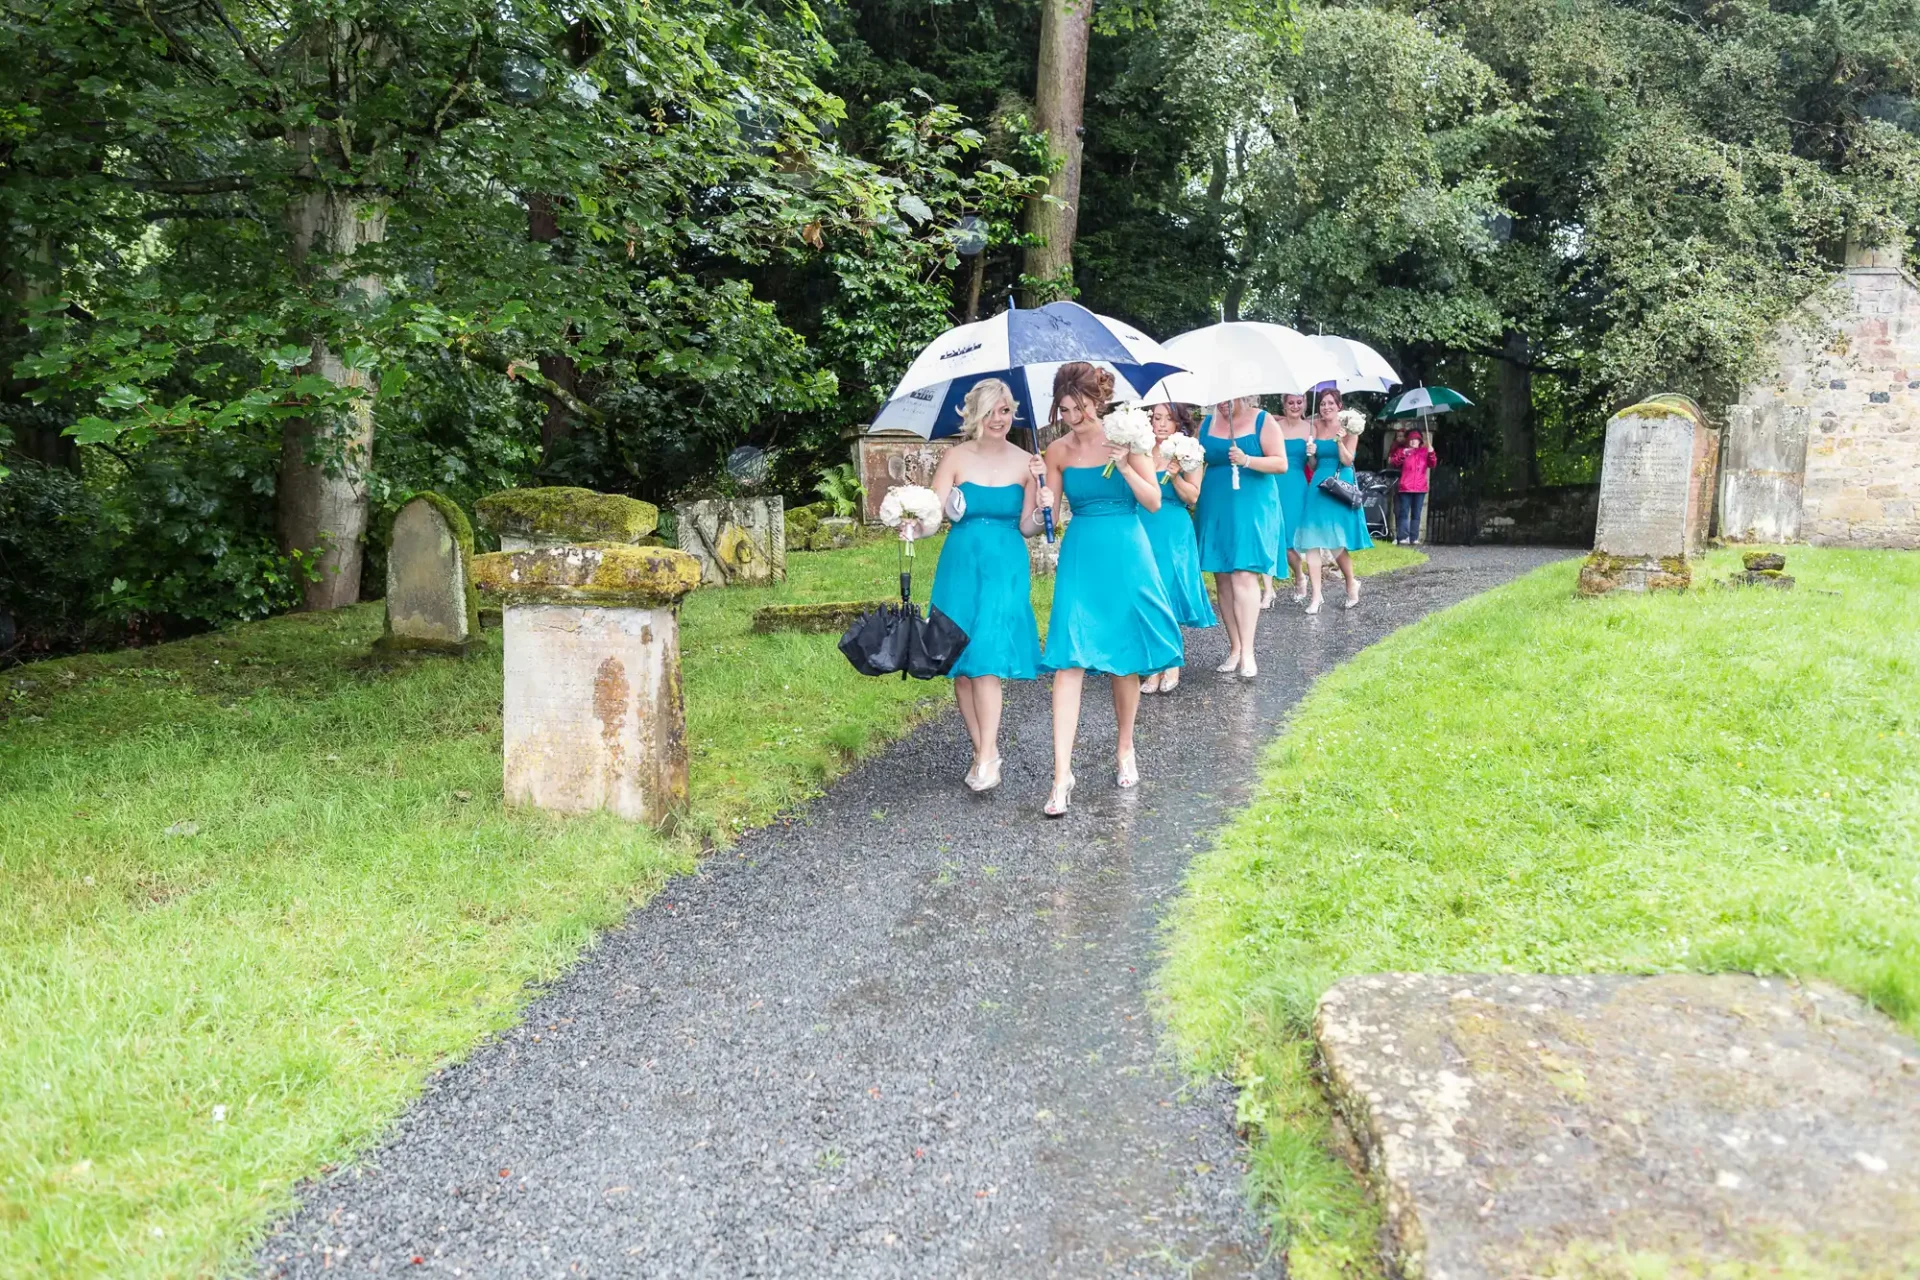 Women in turquoise dresses walk along a cemetery path with umbrellas, smiling and chatting.